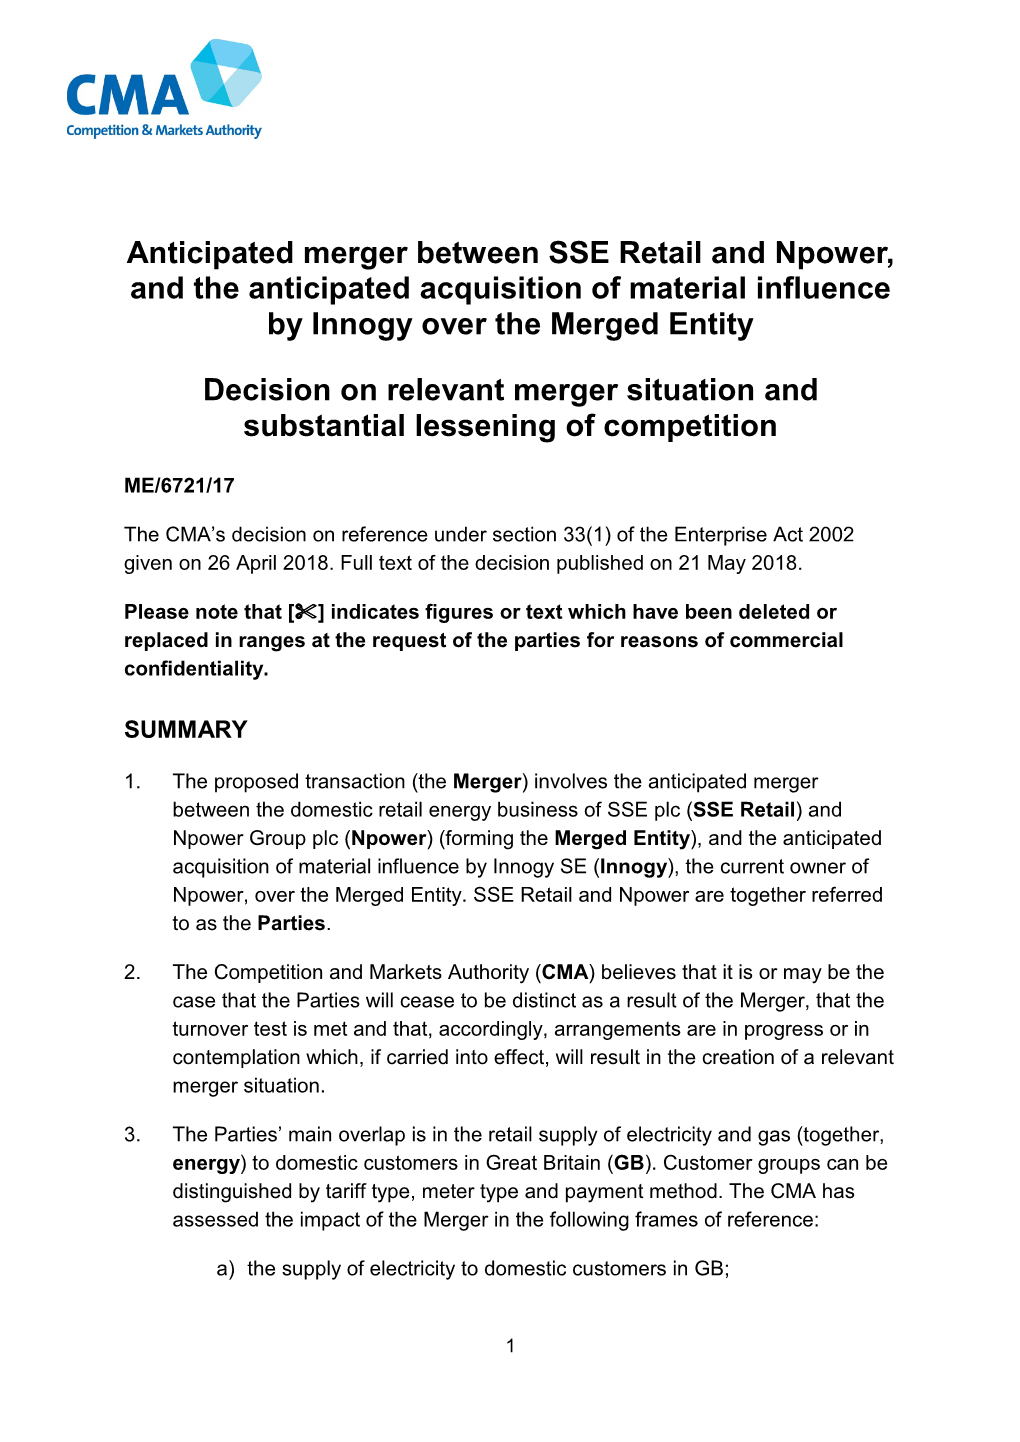 Anticipated Merger Between SSE Retail and Npower, and the Anticipated Acquisition of Material Influence by Innogy Over the Merged Entity